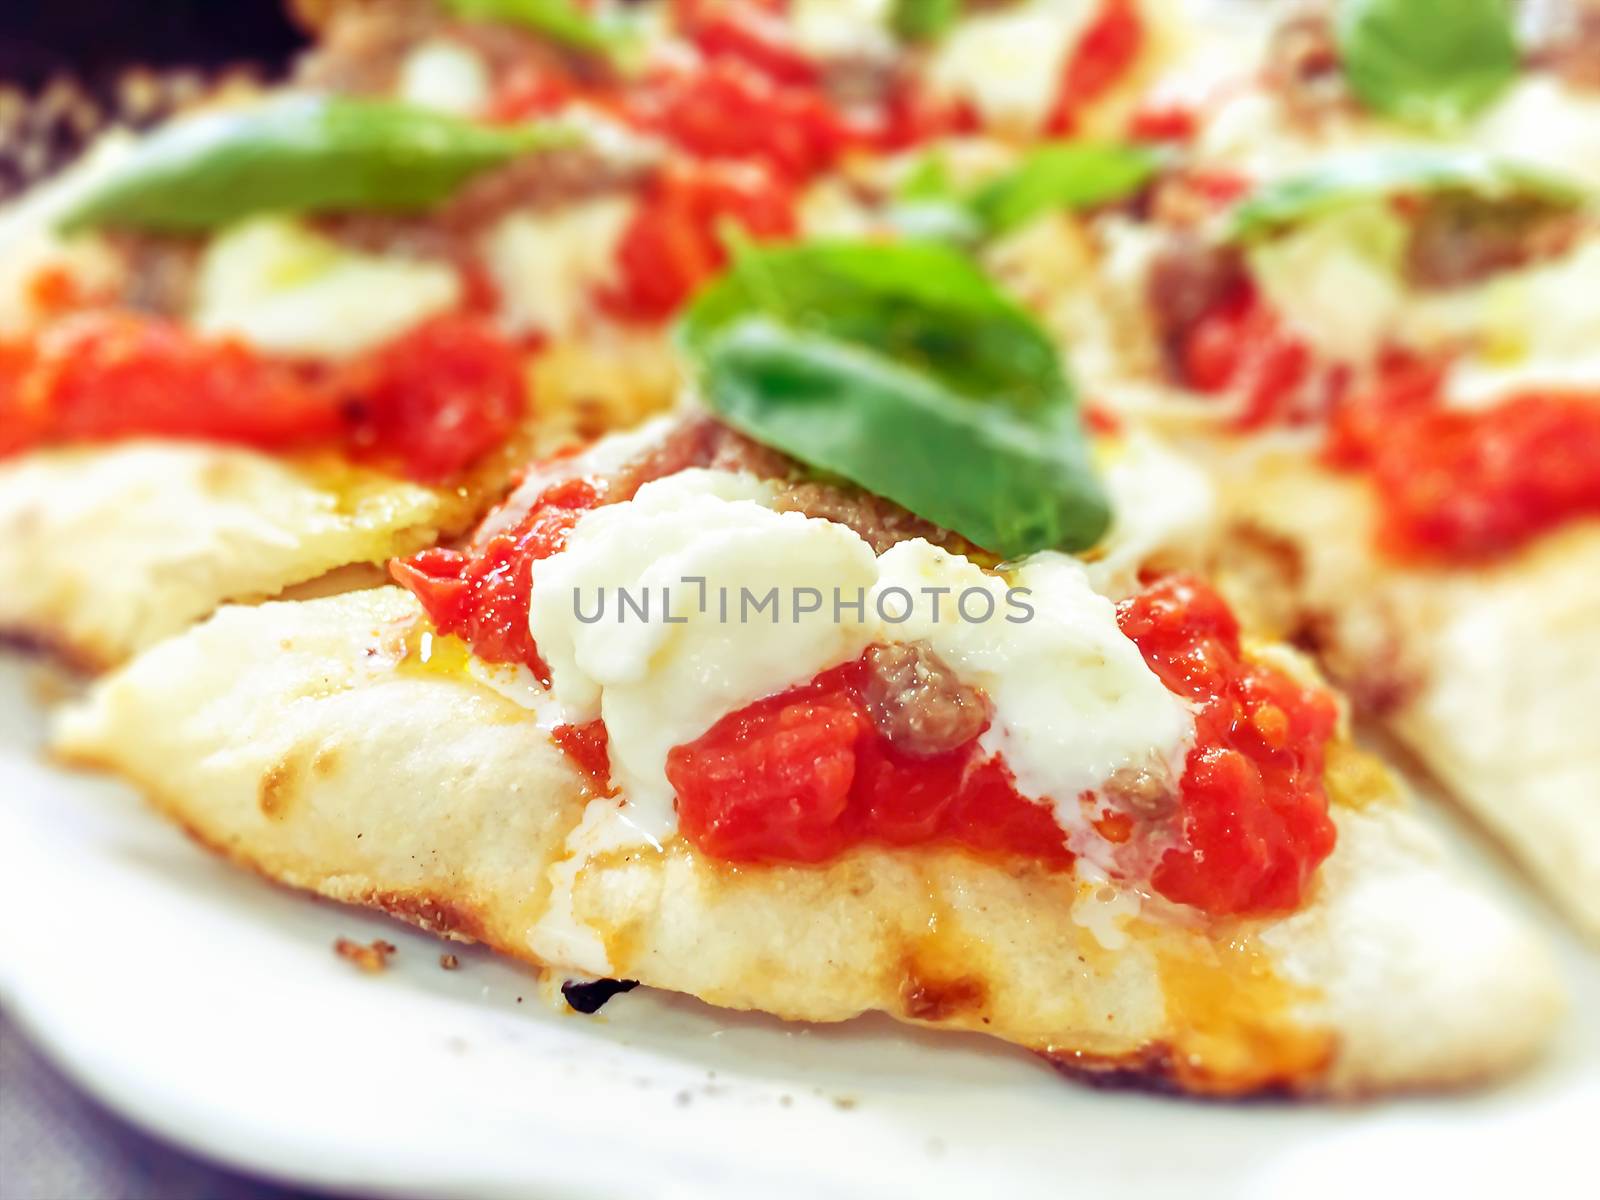 close-up view of a margherita pizza with fresh tomatoes, mozzarella cheese and basil leaves. by rarrarorro